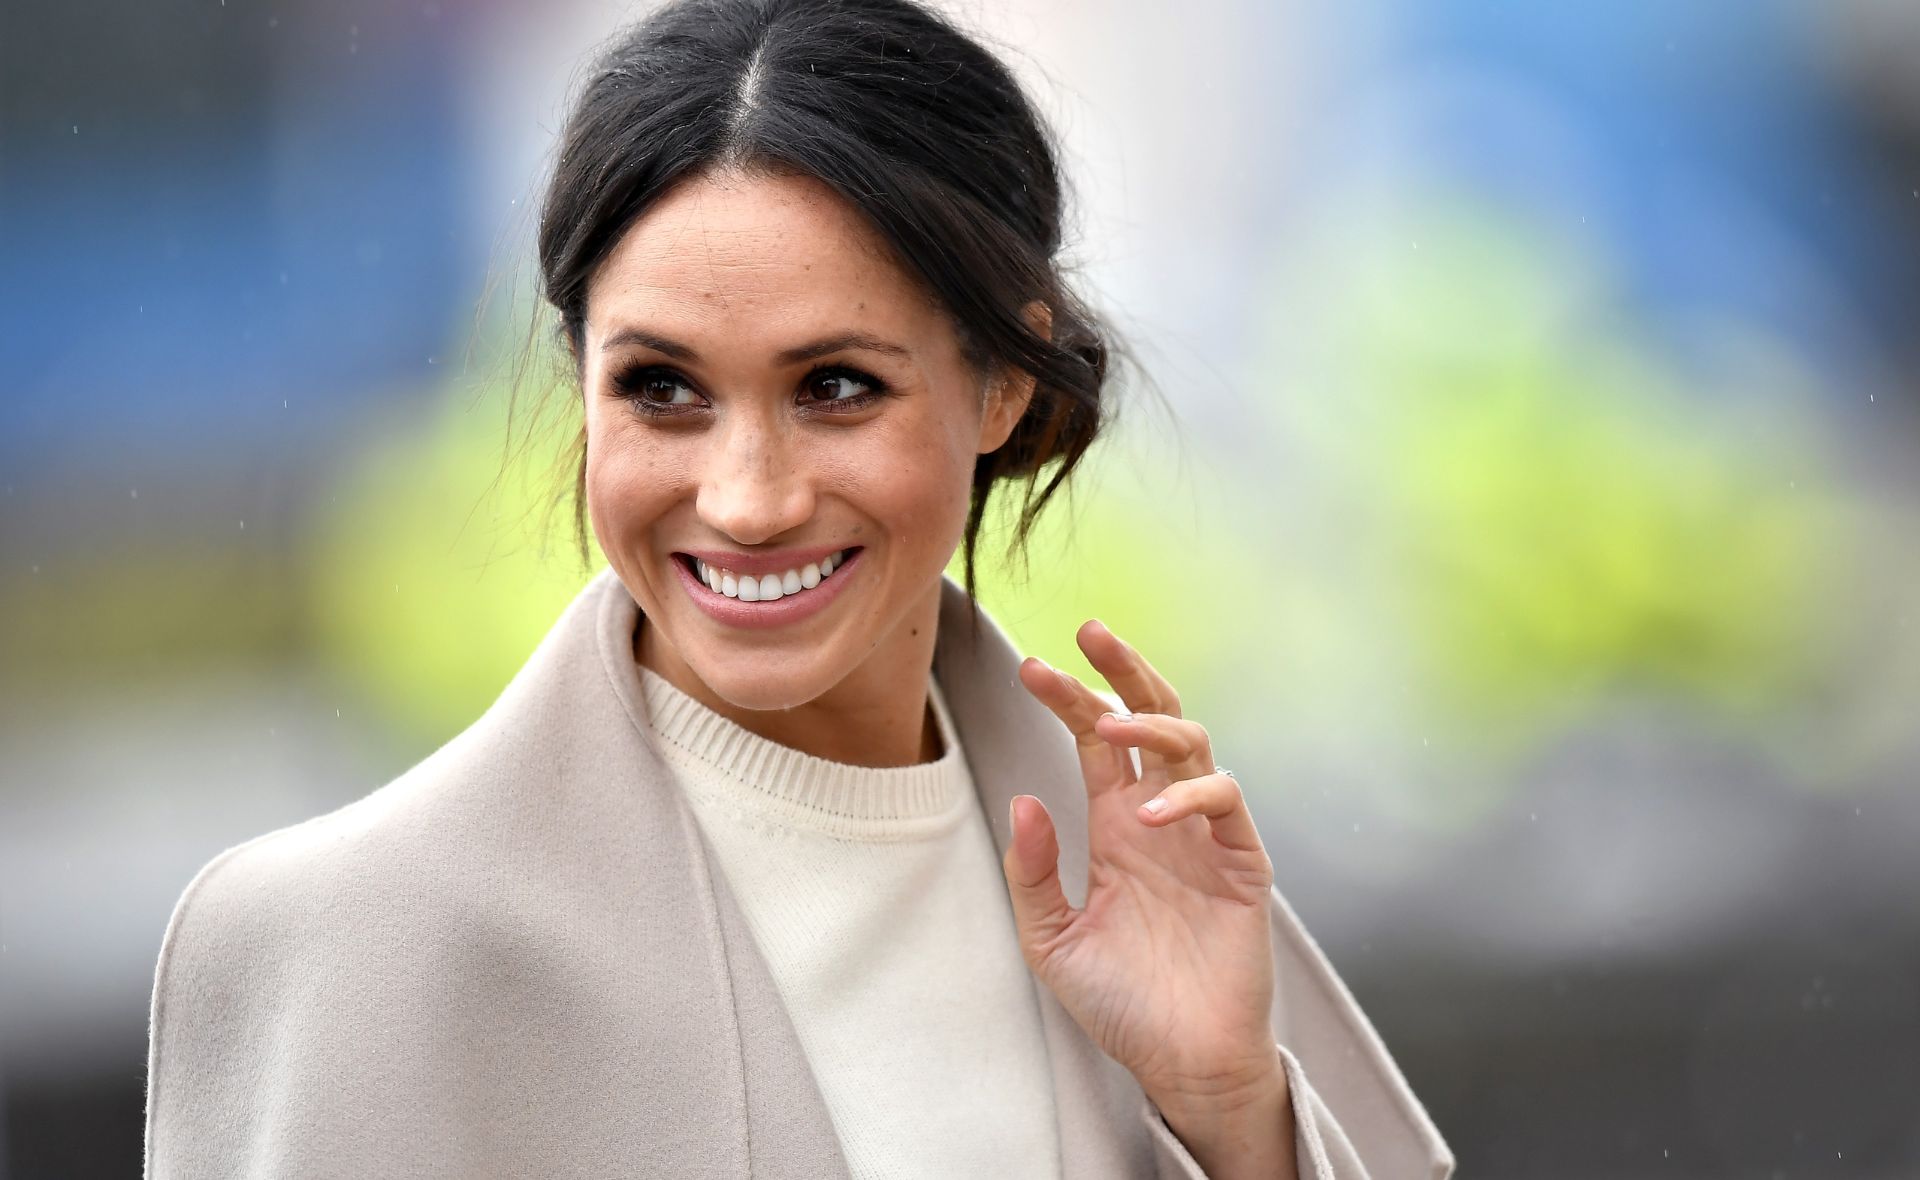 The royal family may be seeking legal consequences against claims made by Meghan Markle